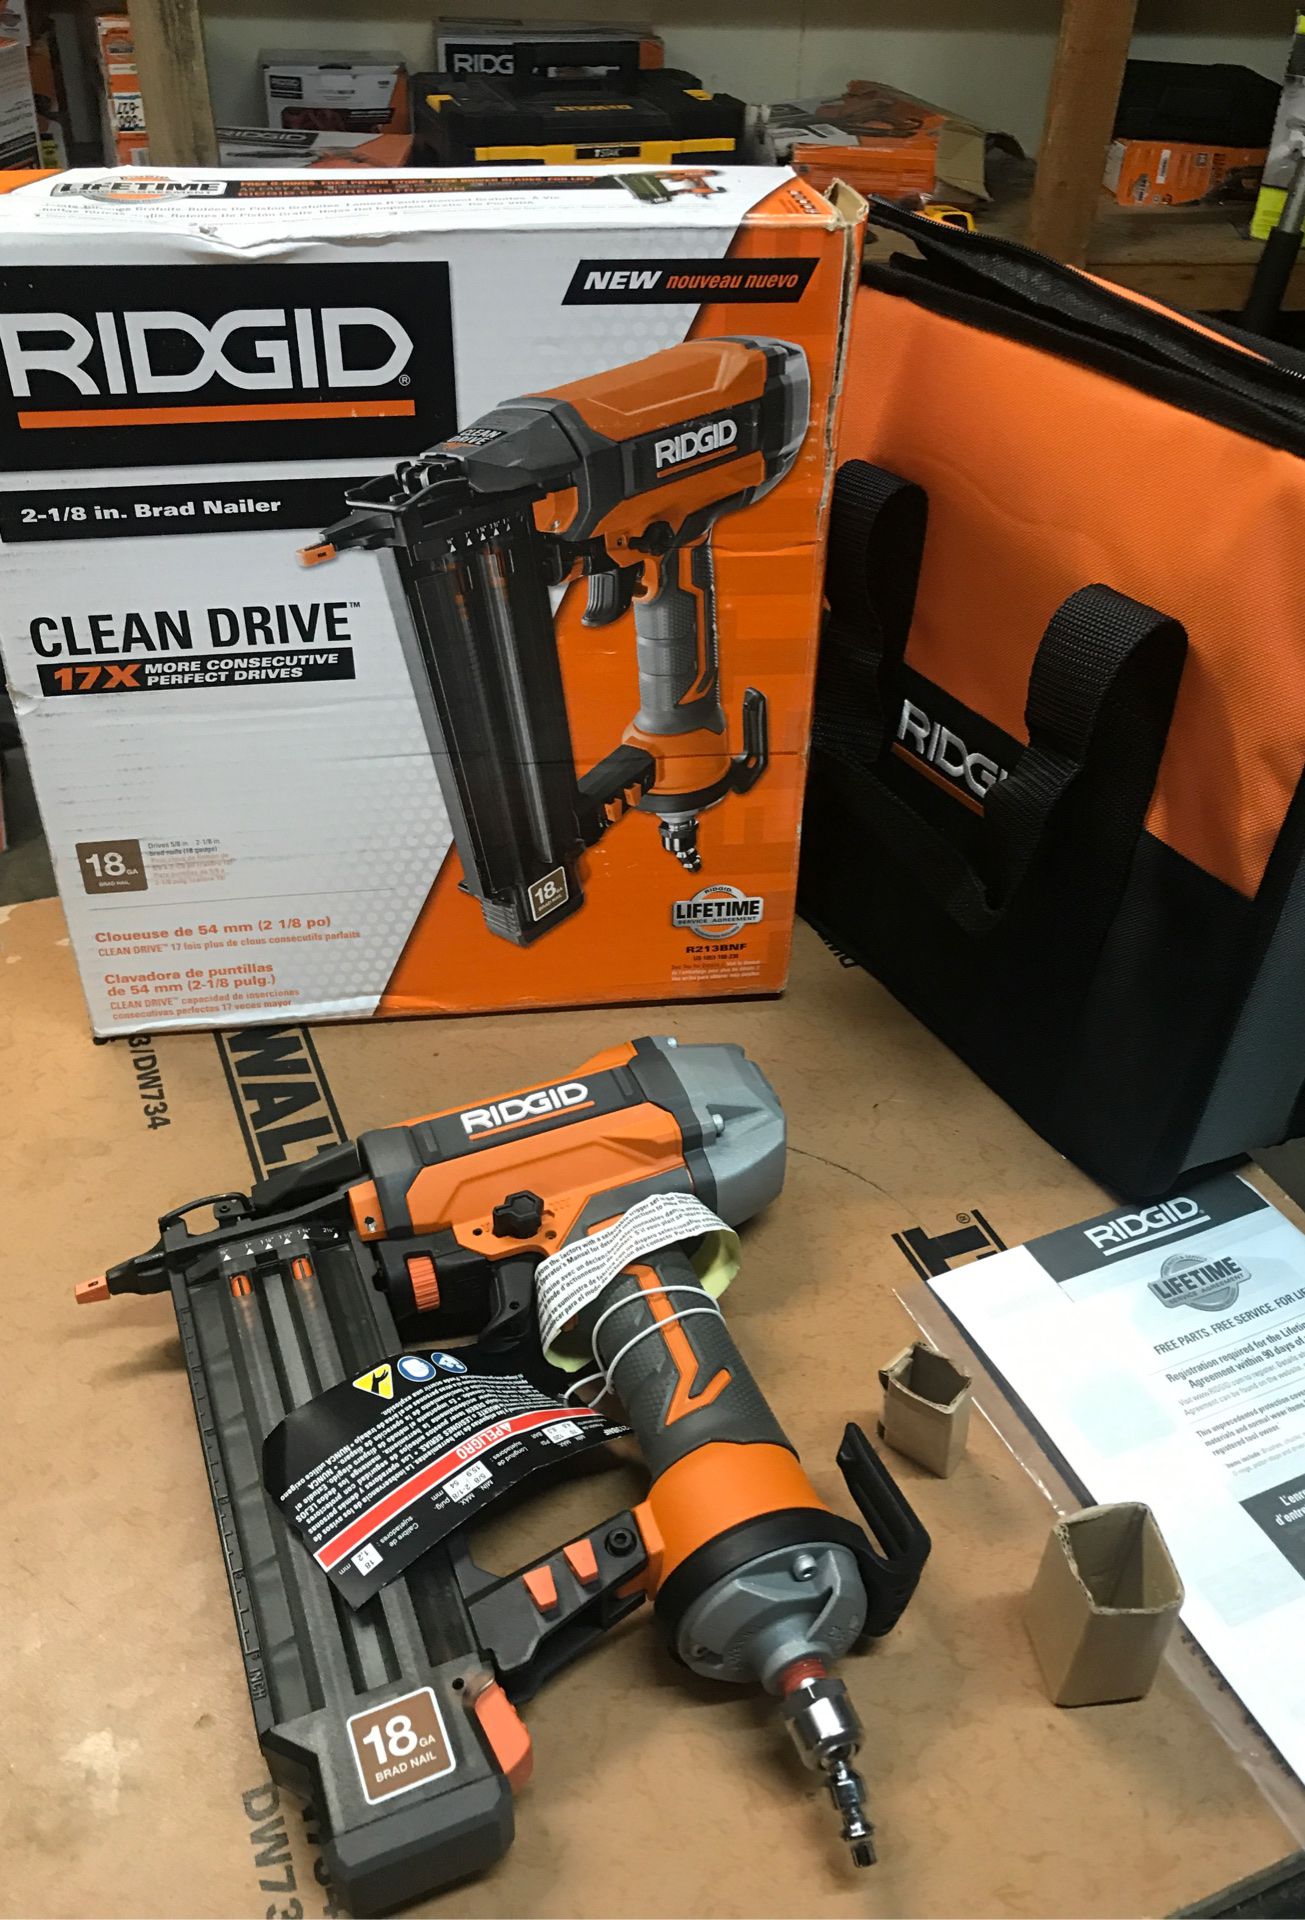 RIDGID 18-Gauge 2-1/8 in. Brad Nailer with CLEAN DRIVE Technology, Tool Bag,